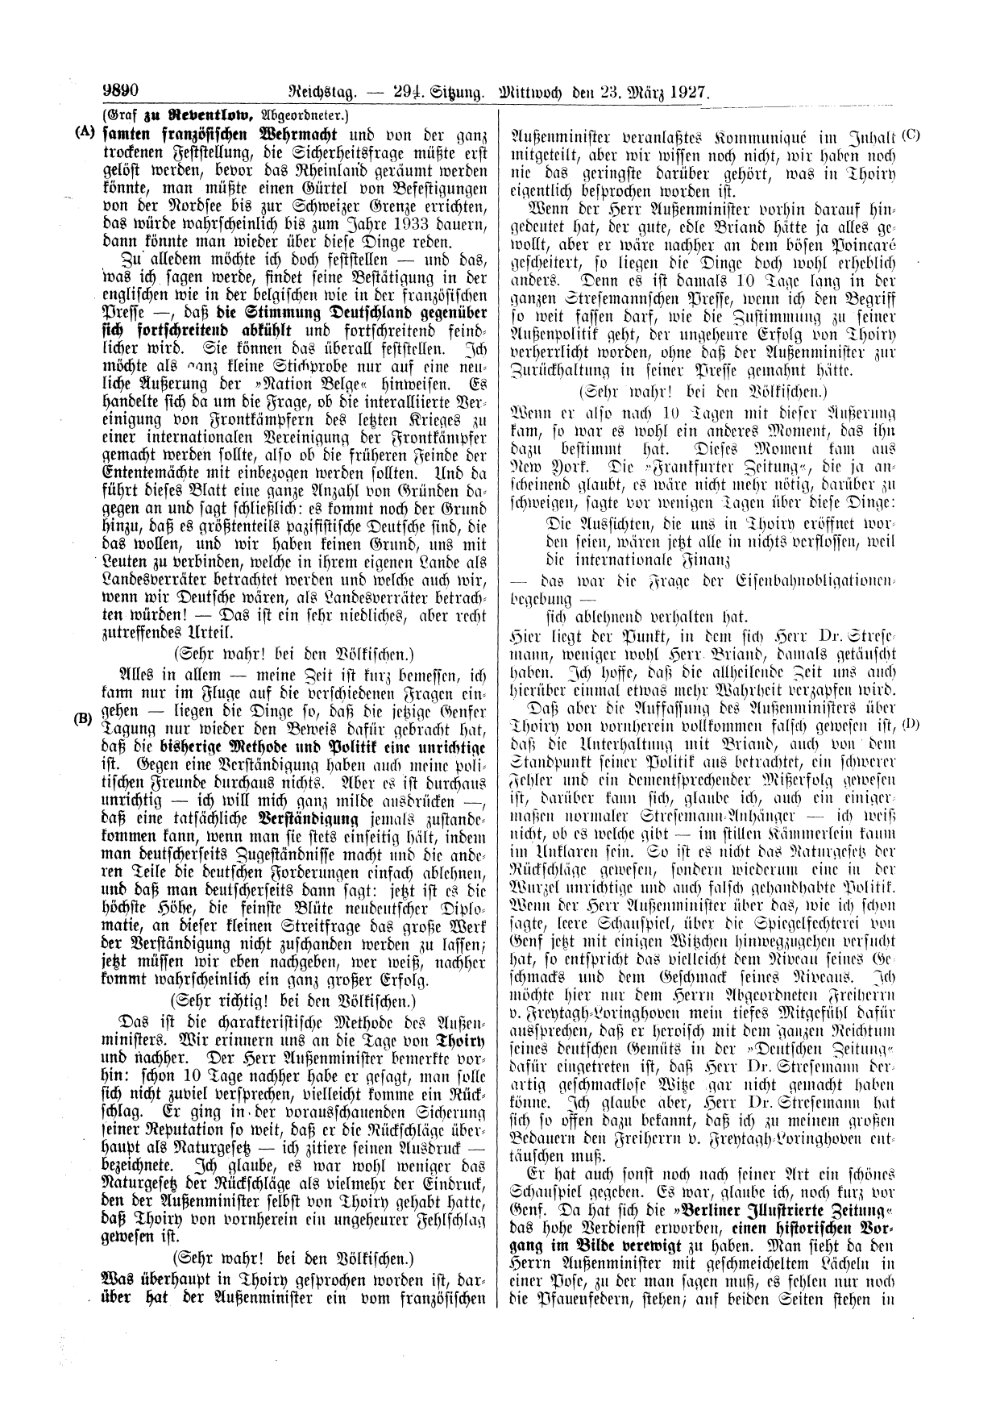 Scan of page 9890